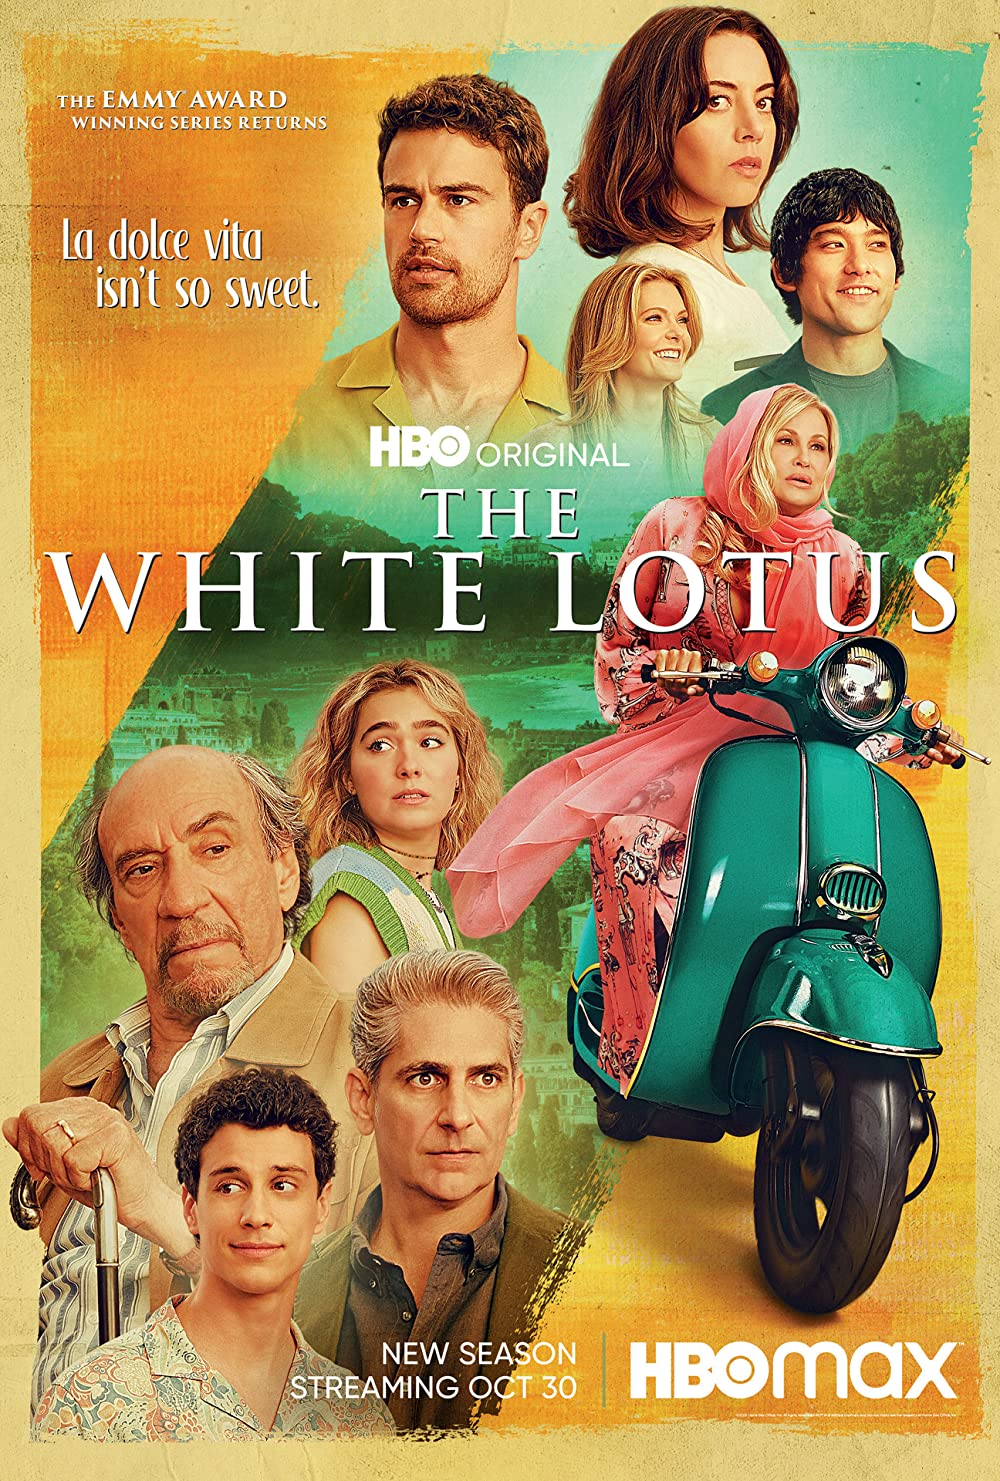 Trouble in paradise! The White Lotus cast – ranked by awfulness, Television